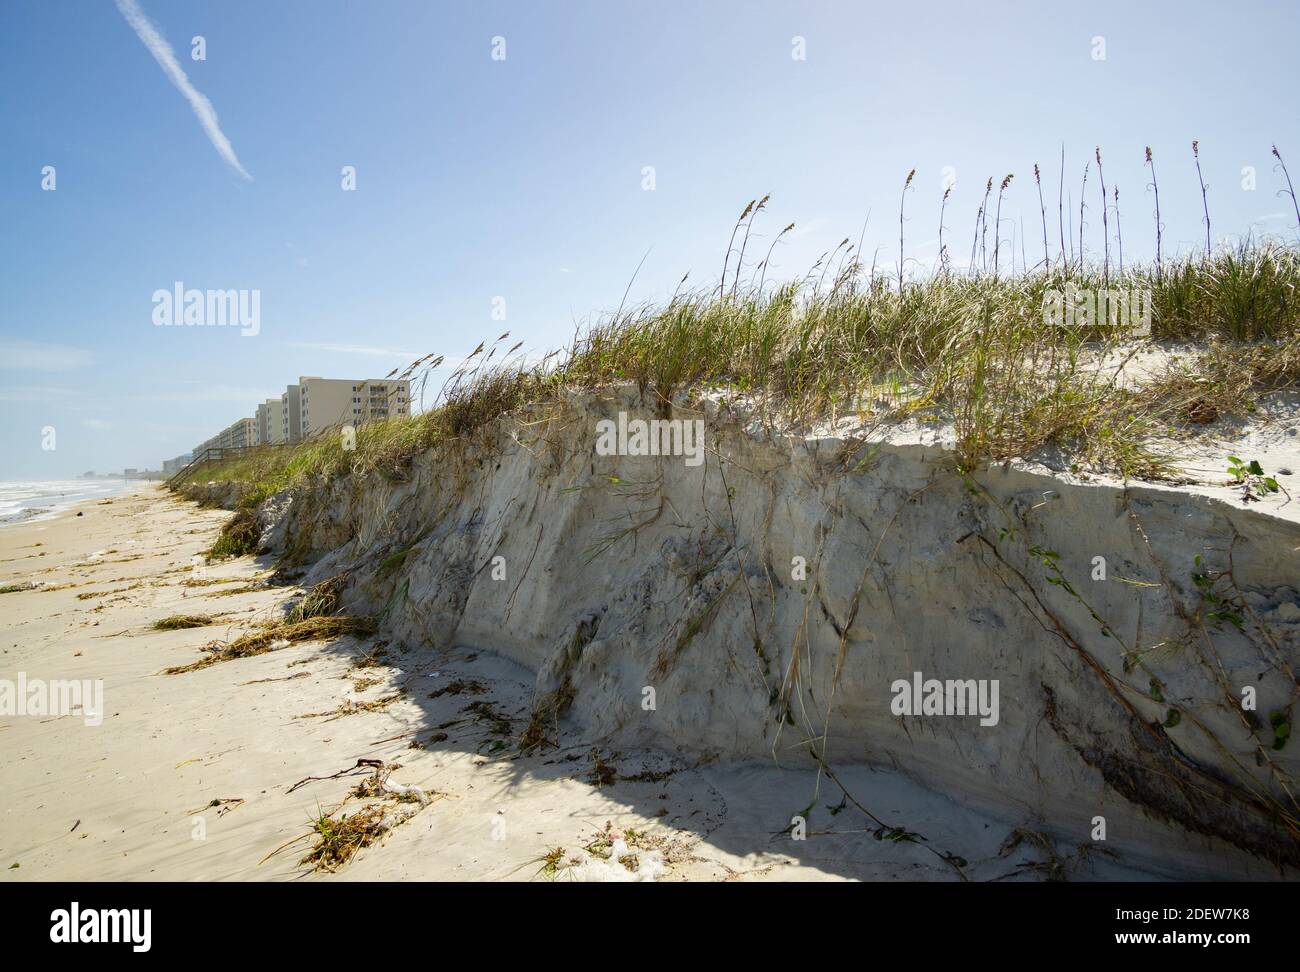 Sep. 21, 2020. Sand dunes suffer serious erosion during hurricanes and tropical storms. This dune shows damage following heavy winds and storm surge. Stock Photo